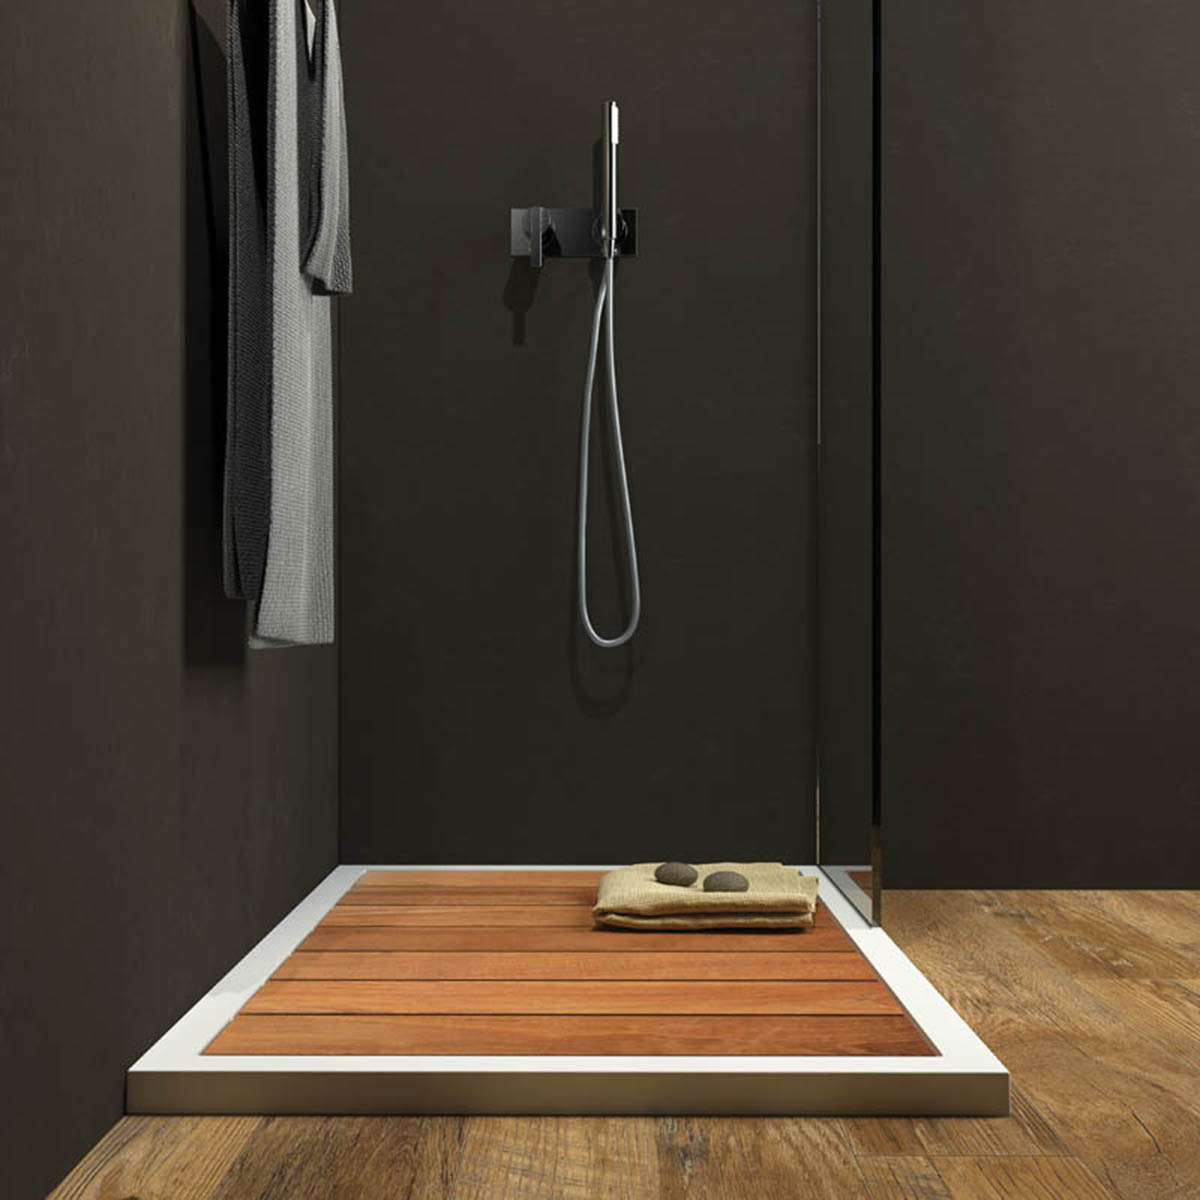 Luxolid shower tray with wooden slats GADO model 80 x120 h 4 cm by